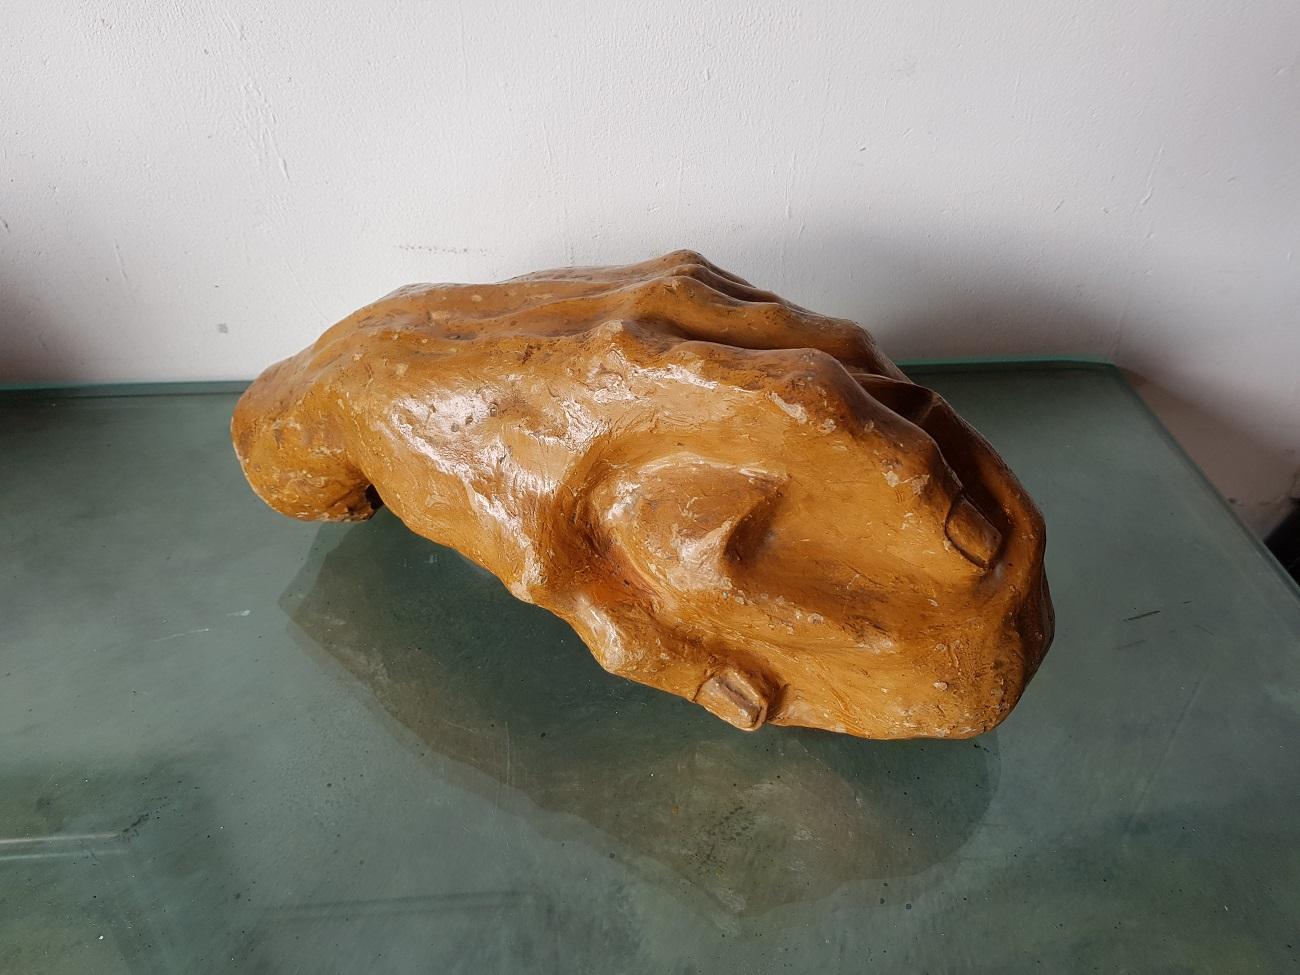 Very beautiful this old and large model earthenware sculpture of a left hand by an unknown artist and no signature found, probably first half of the 20th century.

The measurements are:
Depth 16.5 cm/ 6.4 inch.
Width 35 cm/ 13.7 inch.
Height